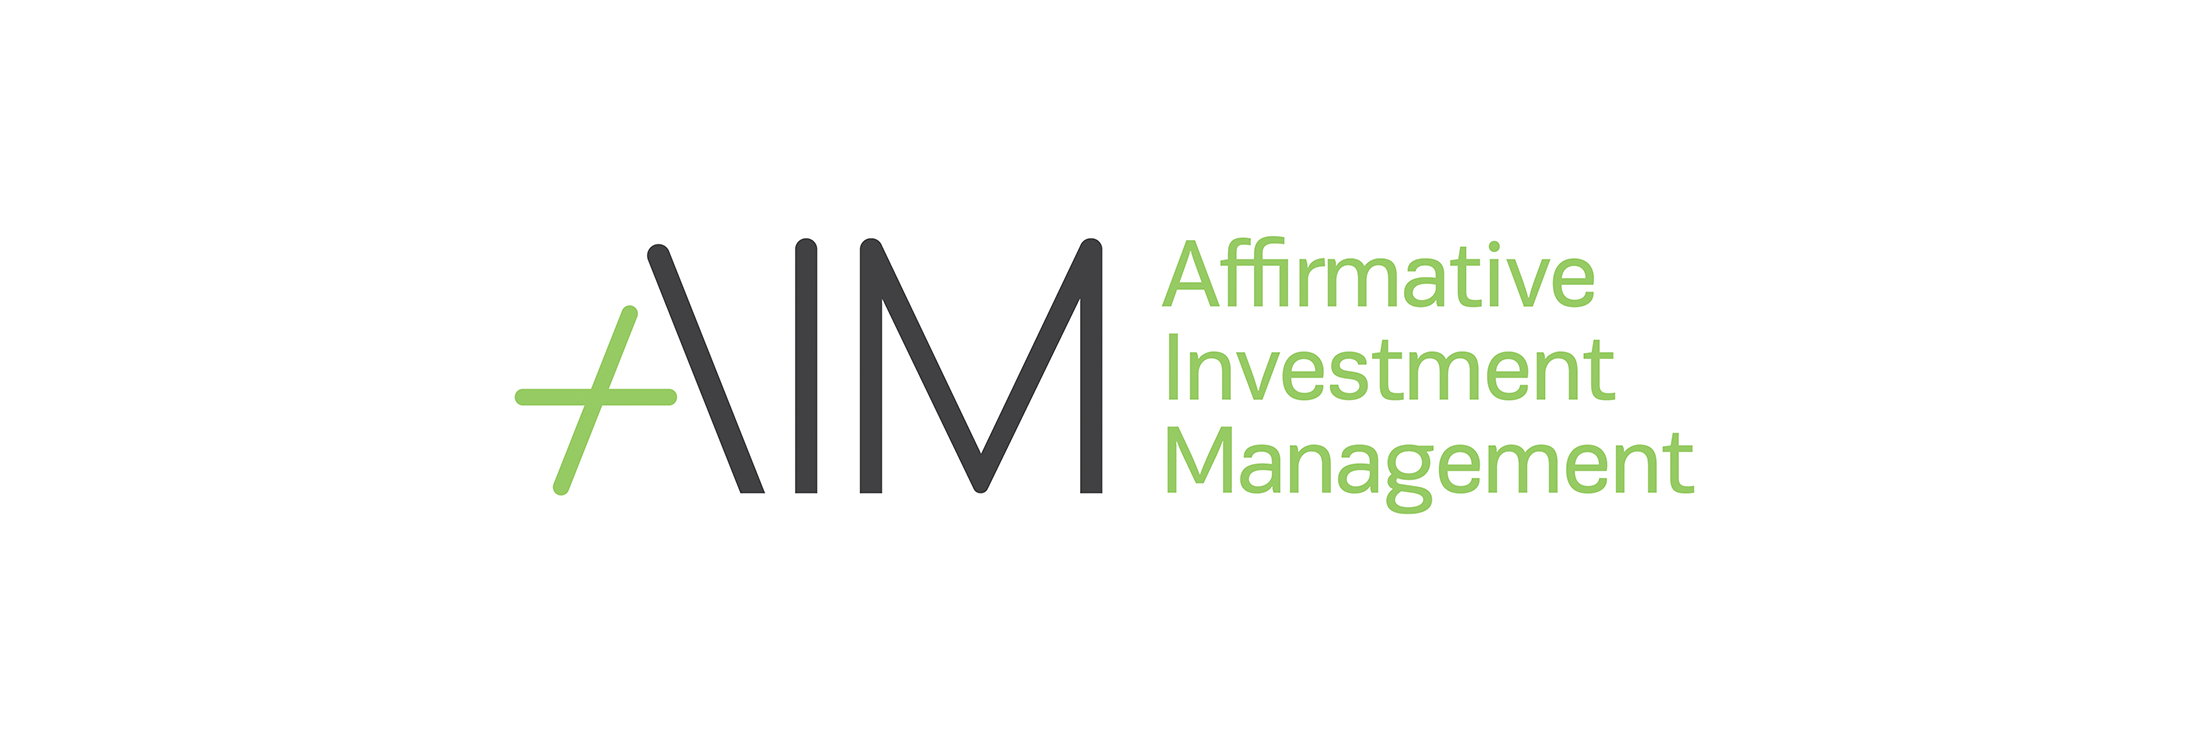 AIM wins at the 2021 Australian Impact Investment Awards